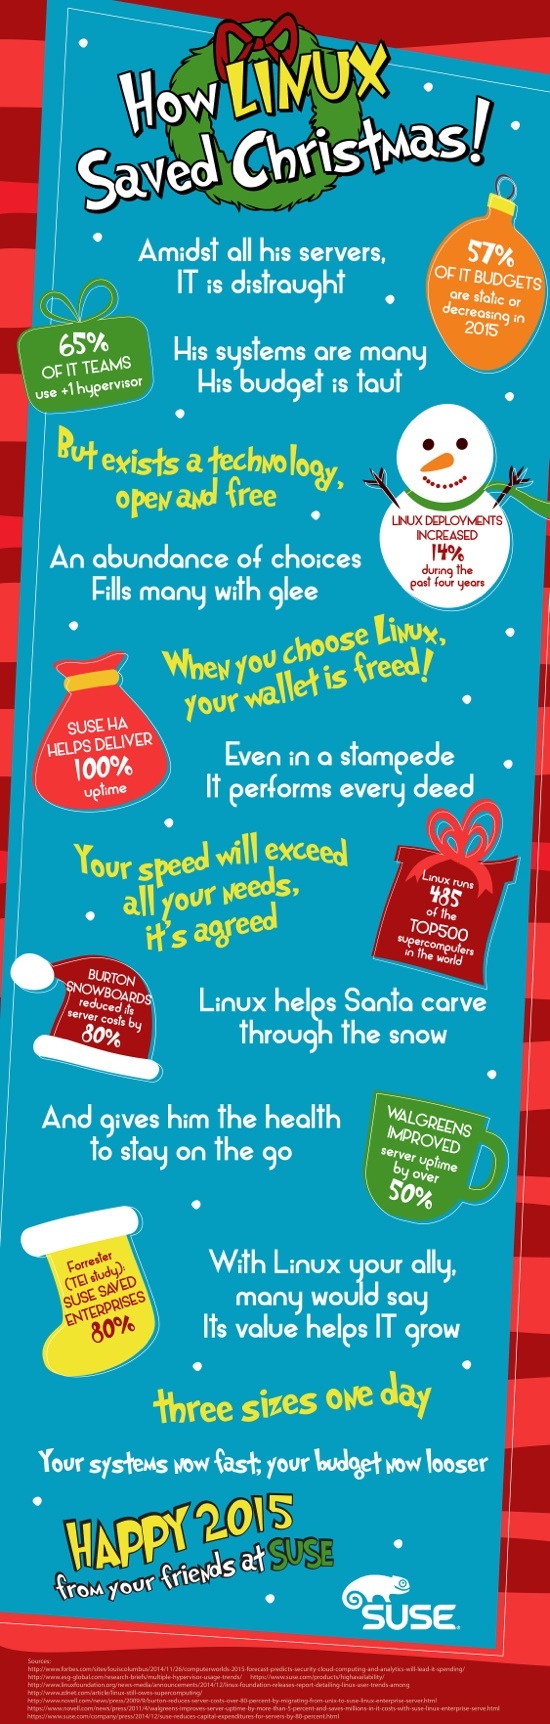 SUSE How Linux Saved Christmas